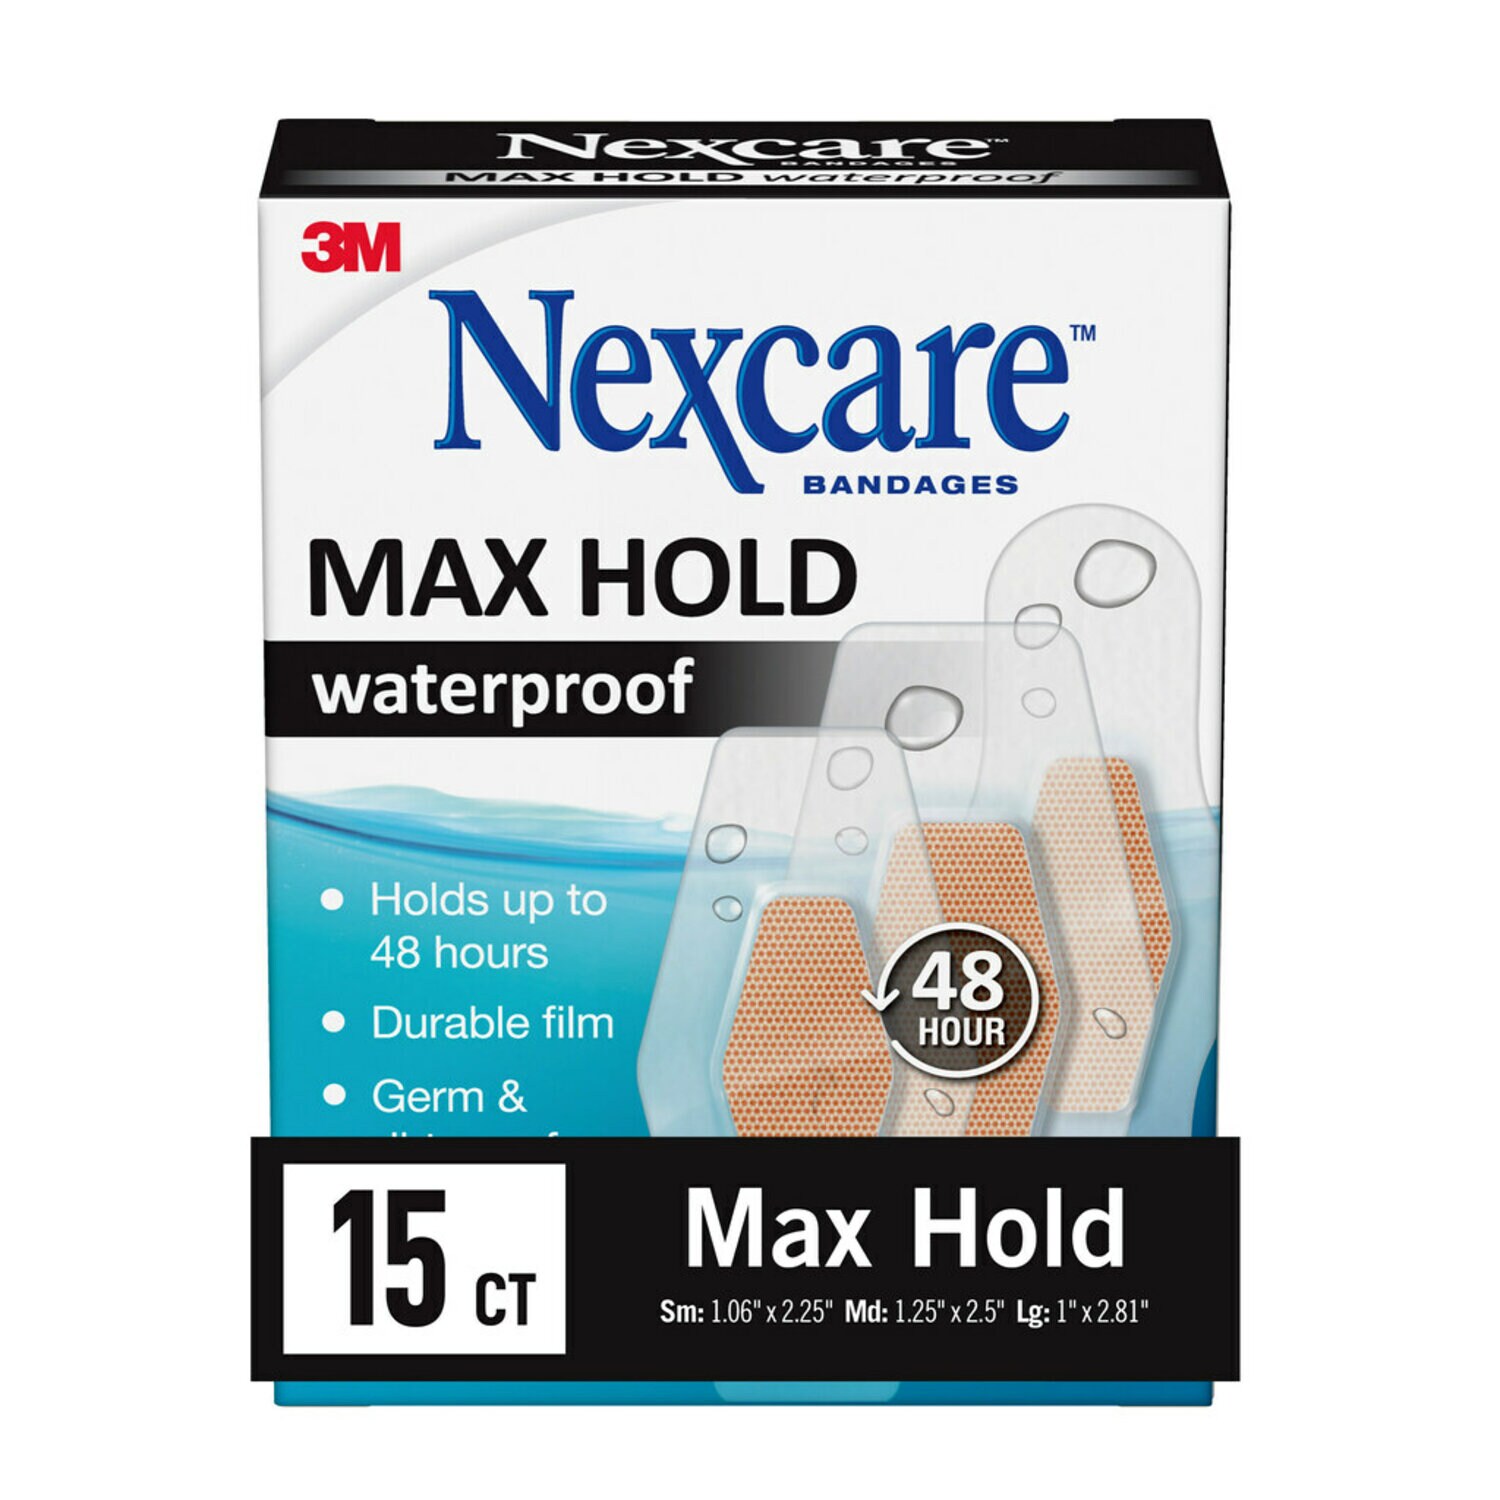 7100184048 - Nexcare Max Hold Waterproof Bandages MHW-15, Assorted 15ct